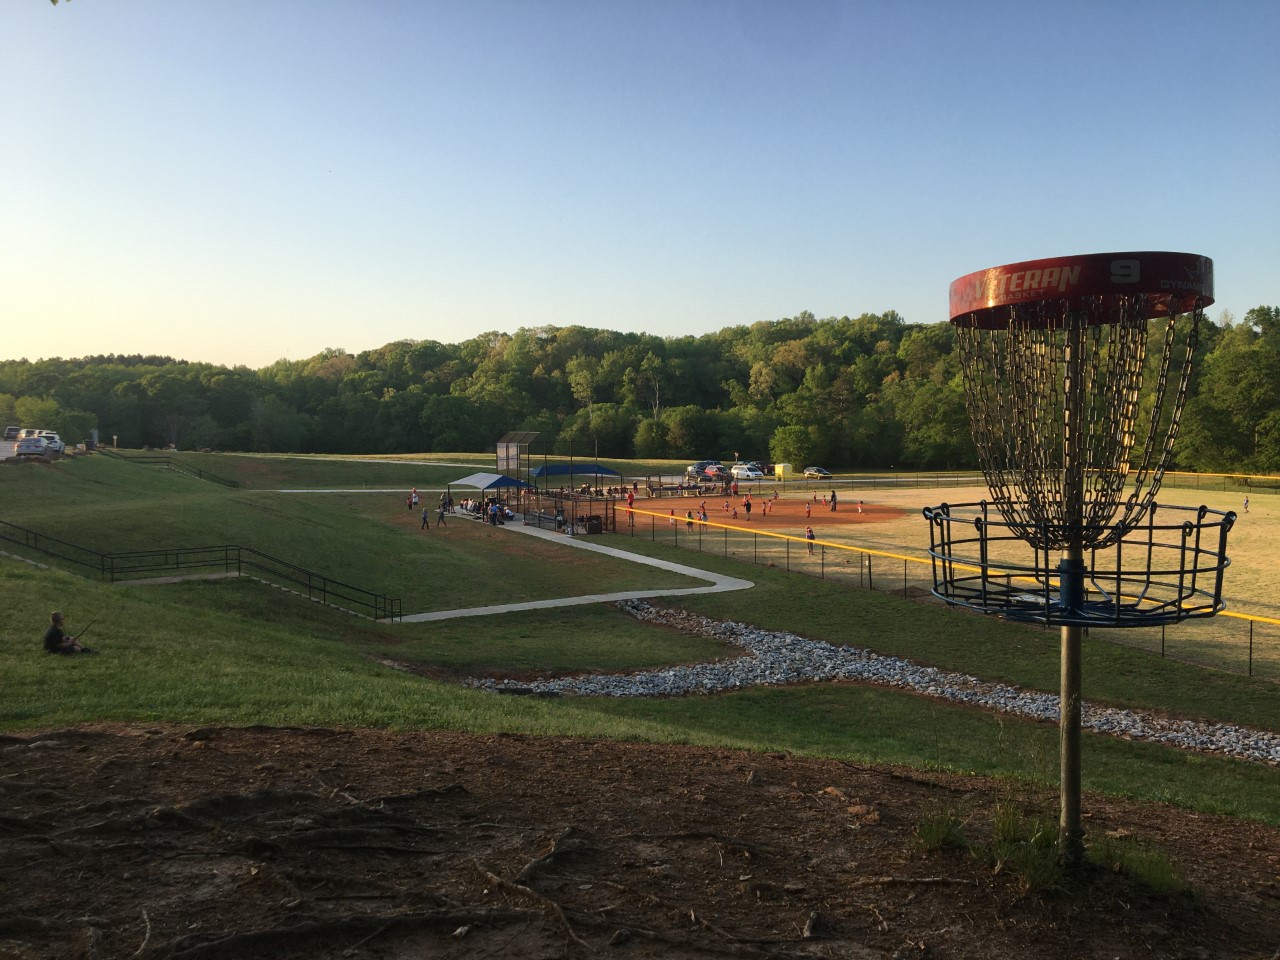 Only a few years ago, Dolly Cooper Park was an empty field with few visitors. Today, a baseball and football field, as well as a disc golf course, mark the first phase of Anderson County's development plan for the park. (Photo/Molly Hulsey) 